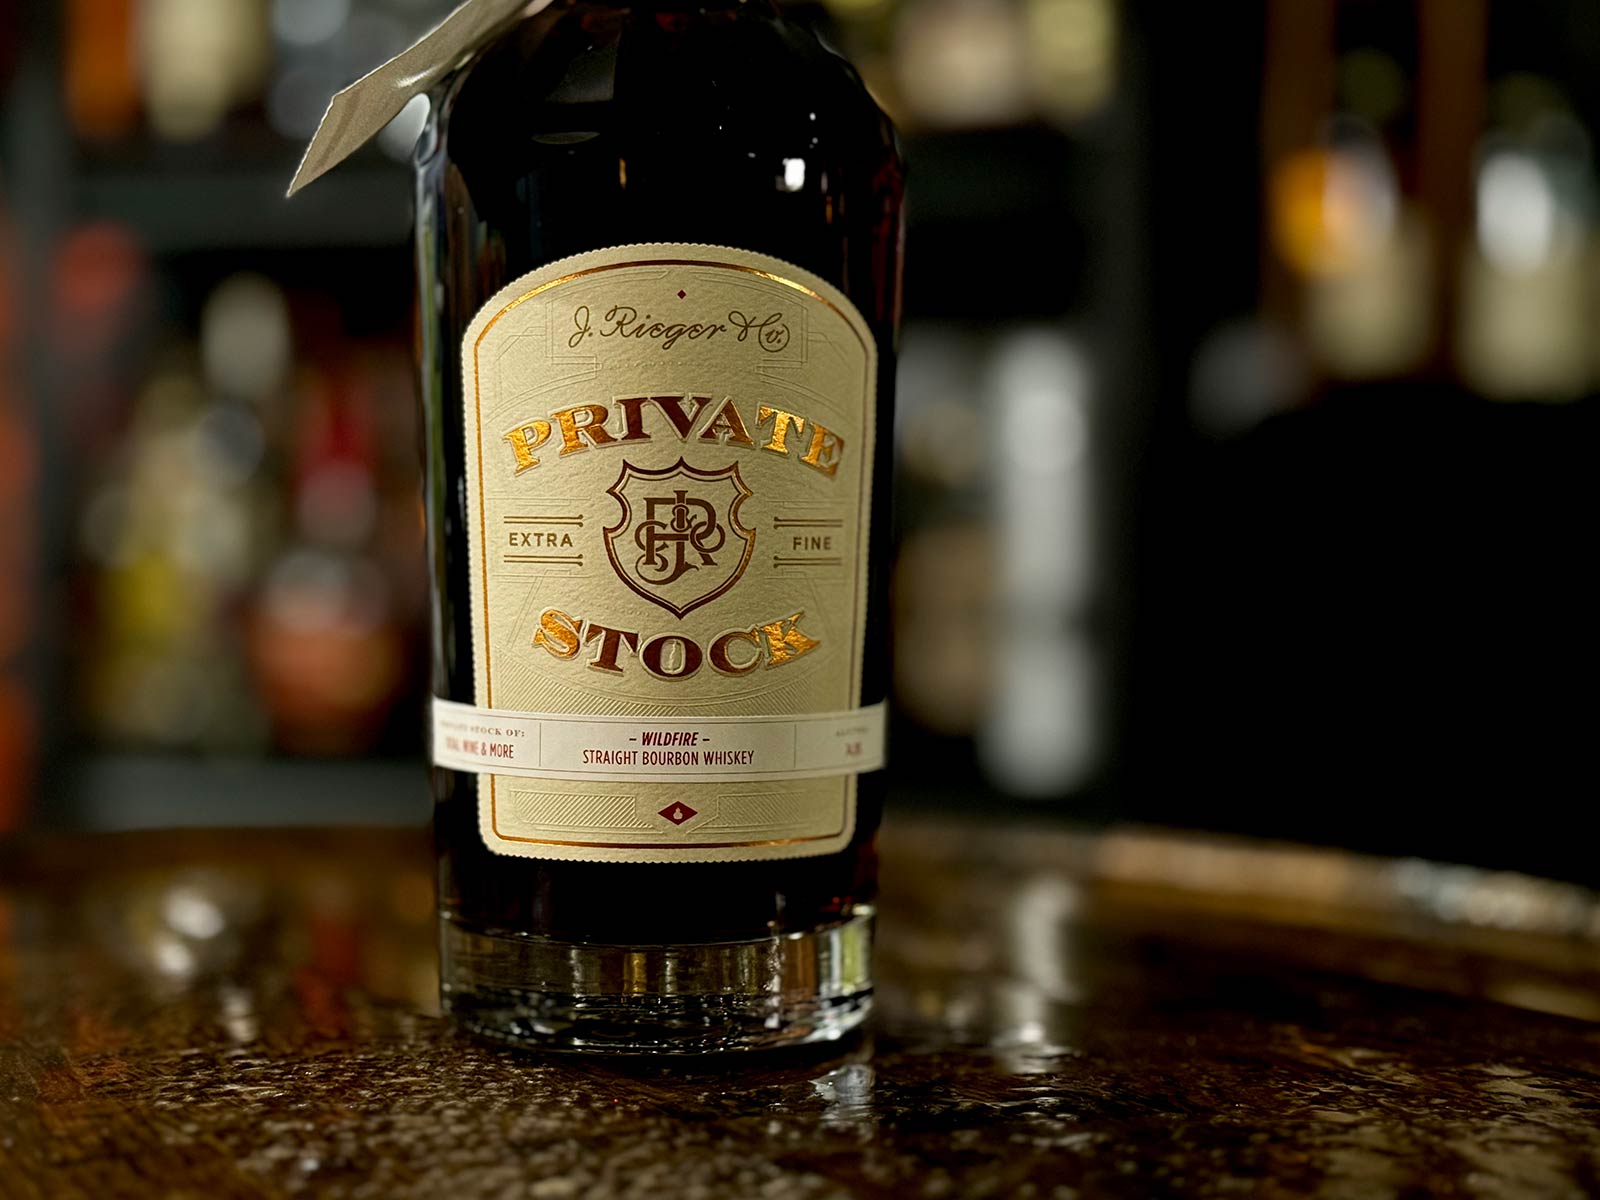 RIEGER'S PRIVATE STOCK (Total Wine) - WildFire: Straight Bourbon Whiskey